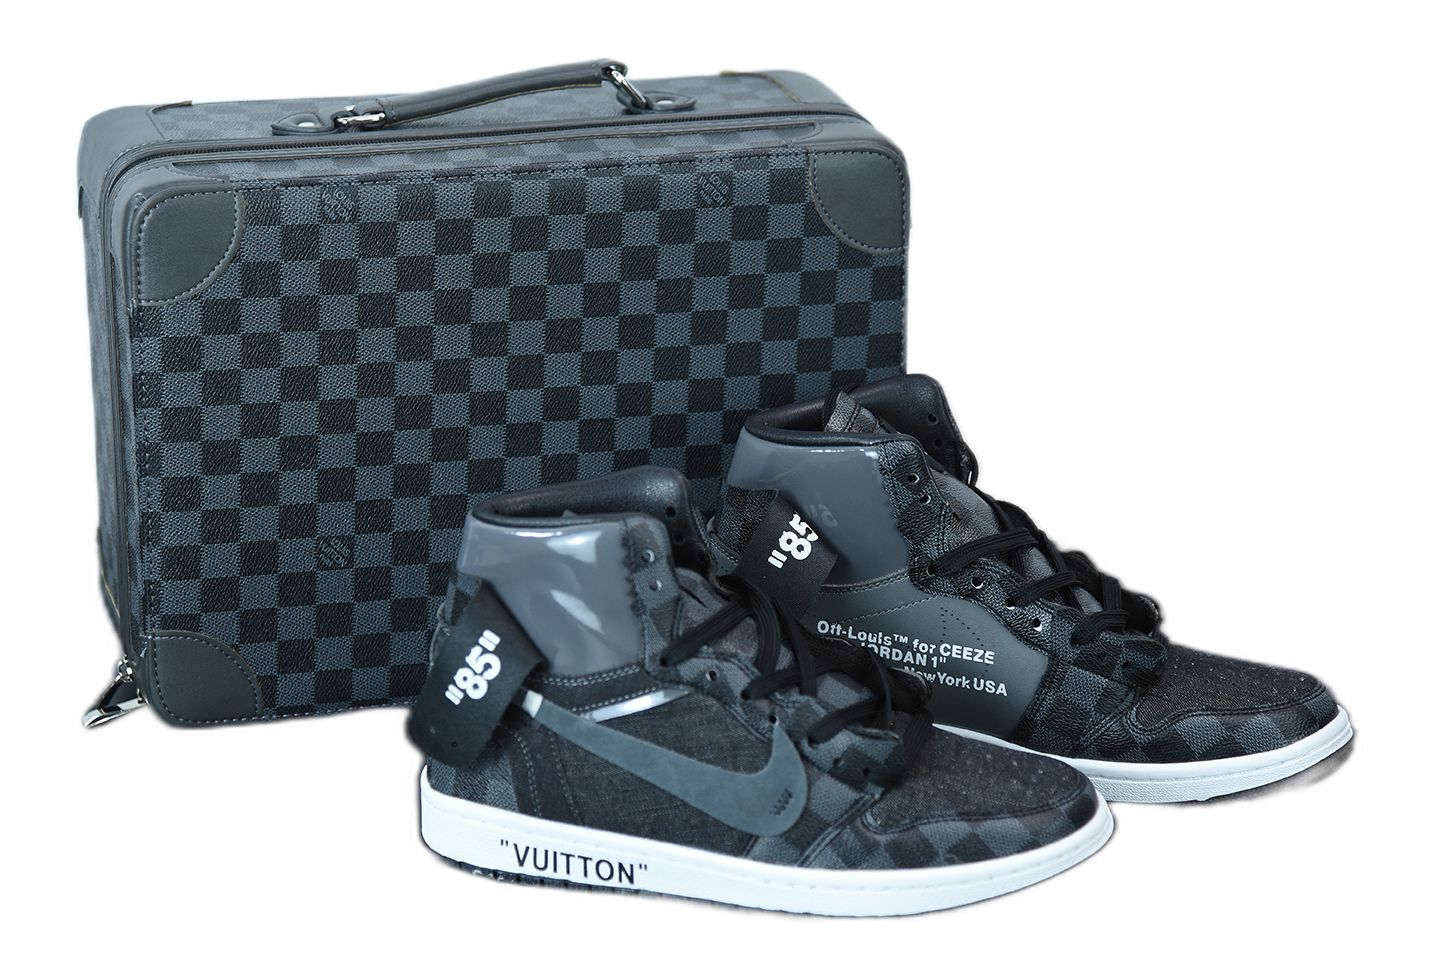 Are Luxury Sneakers Getting Too Expensive